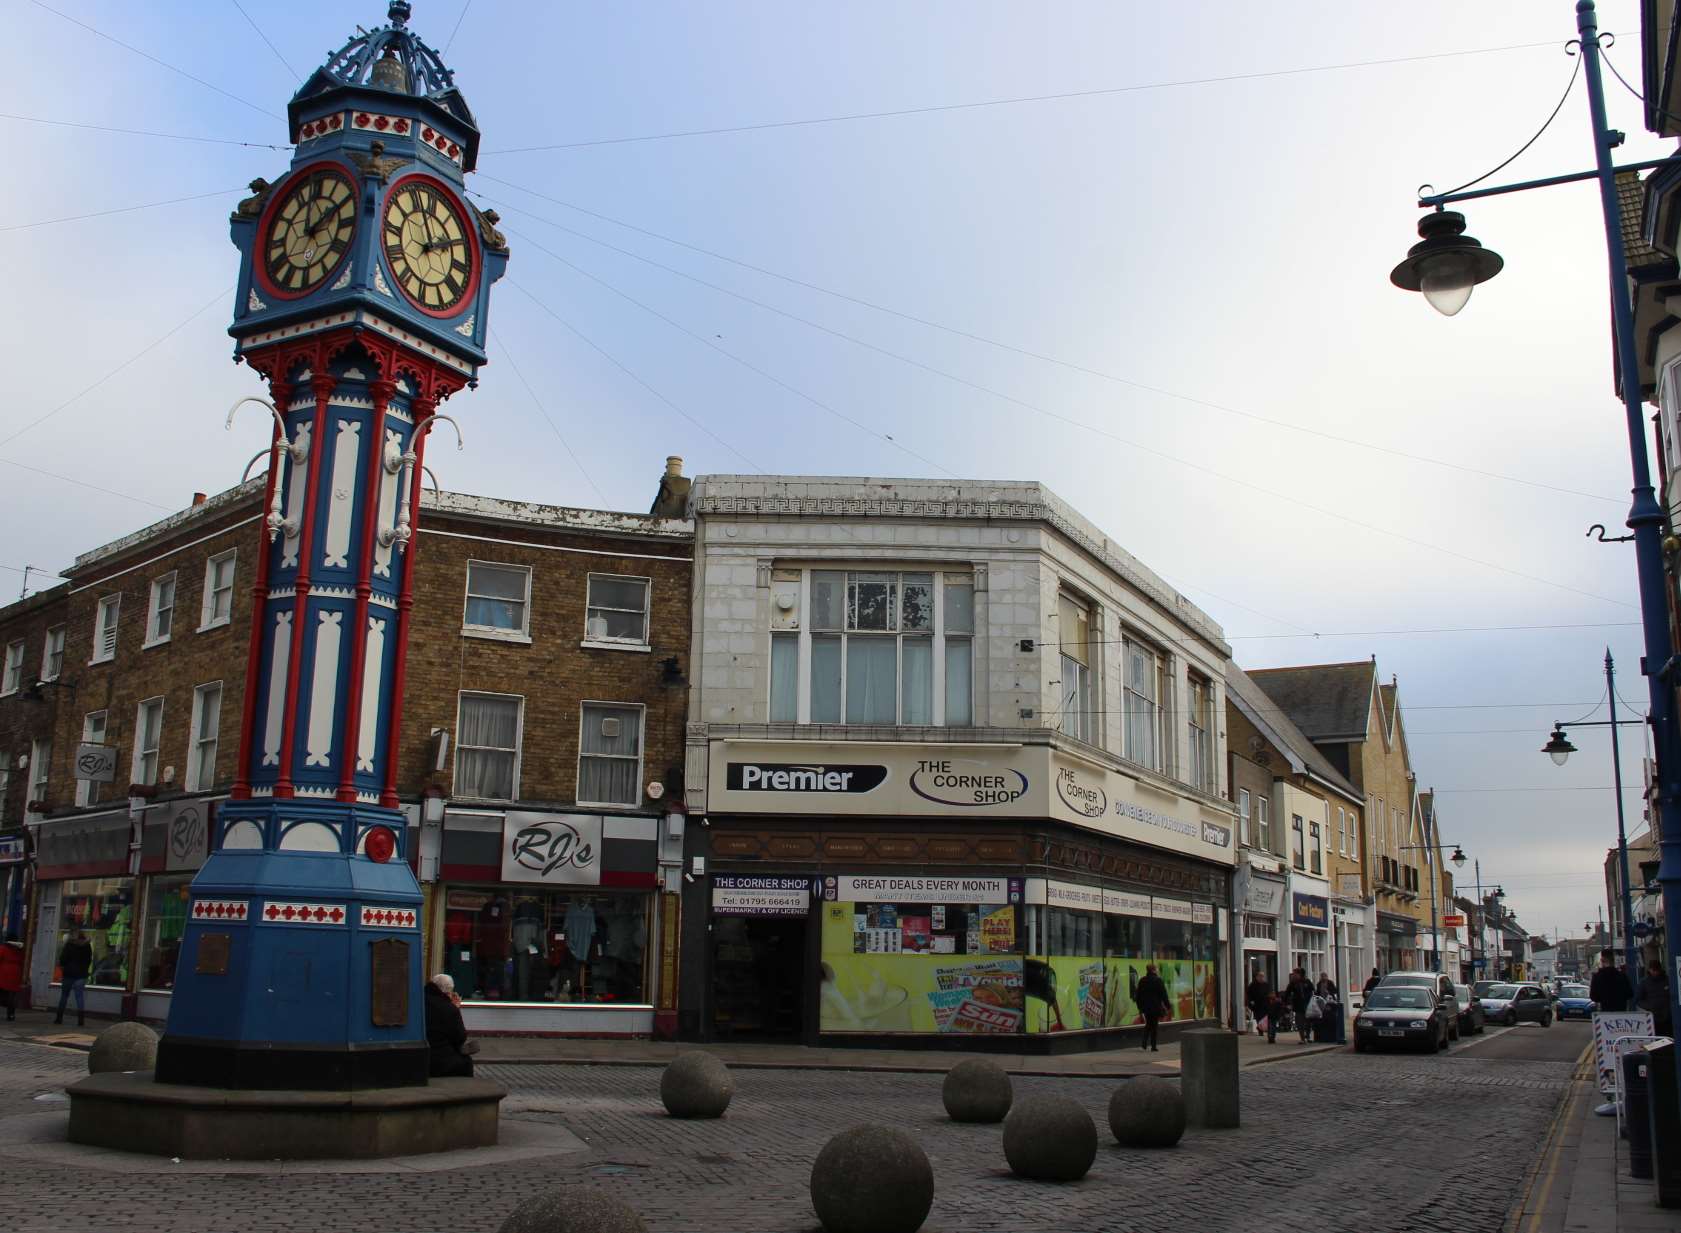 The Premier Corner Shop by Sheerness Clock Tower